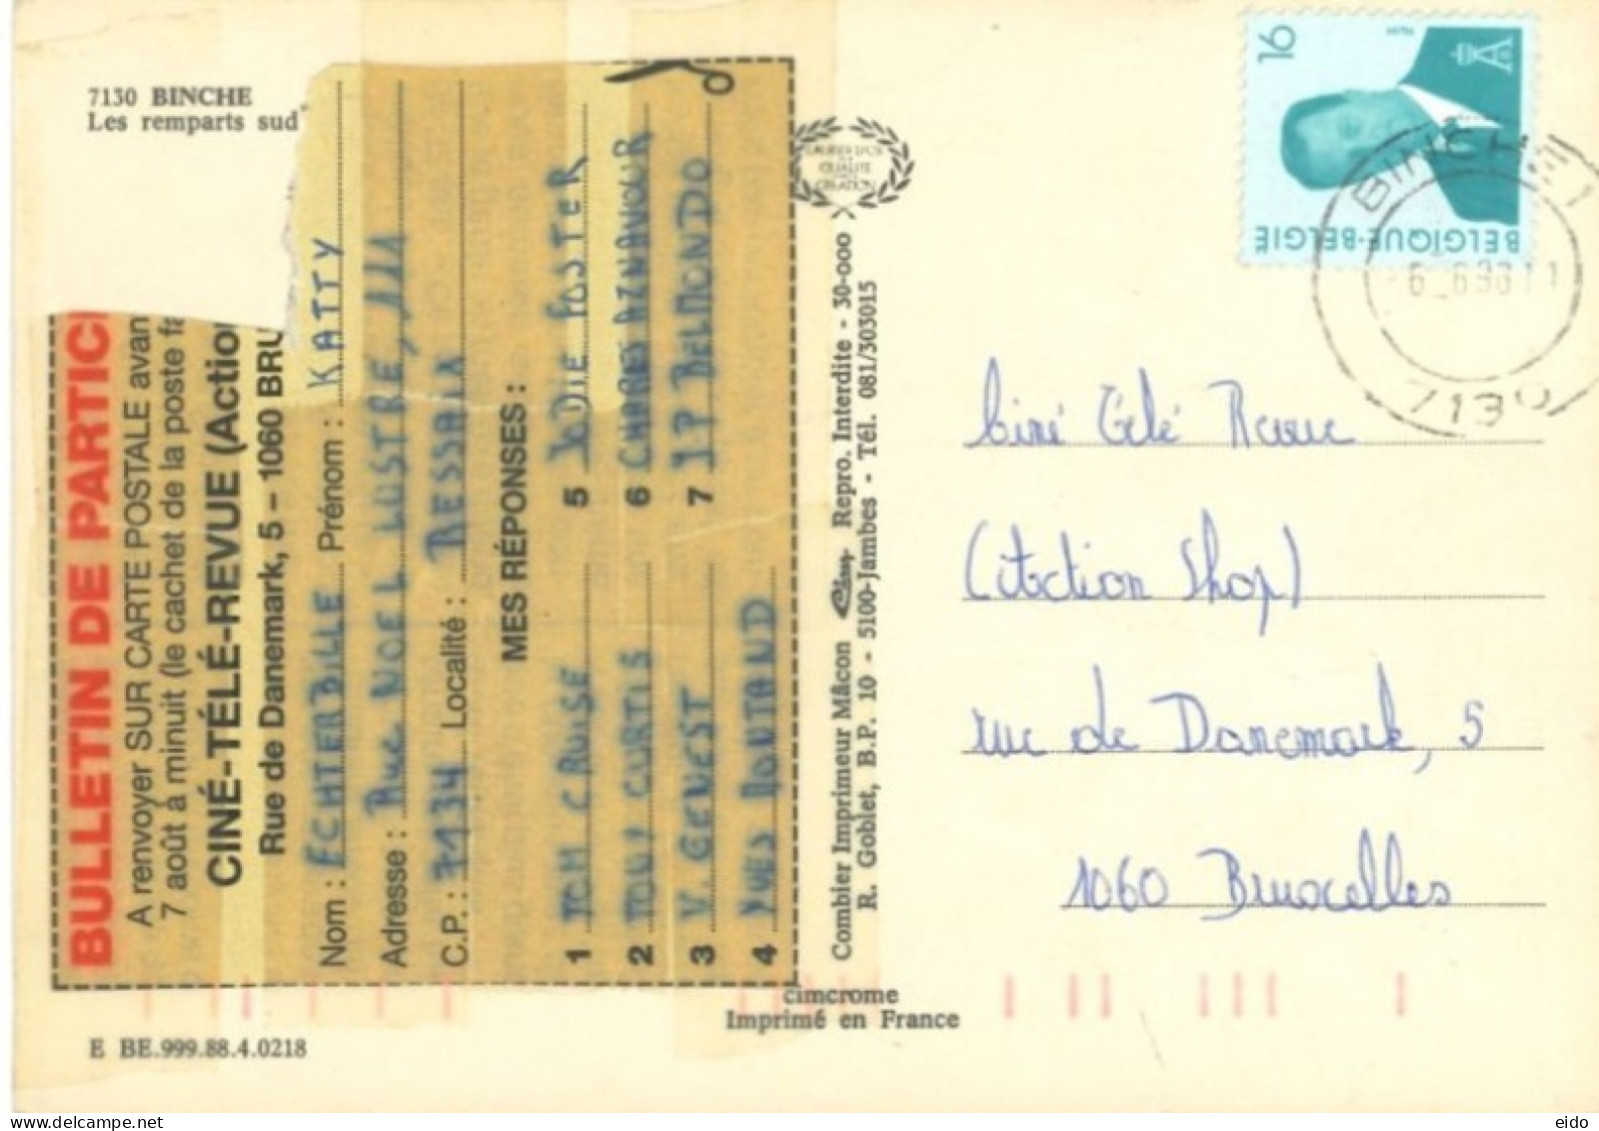 BELGIUM - 1963, BINCHE, LE REMPARTS SUD POSTCARD WITH STAMP SENT TO BRUOCELLES. - Covers & Documents